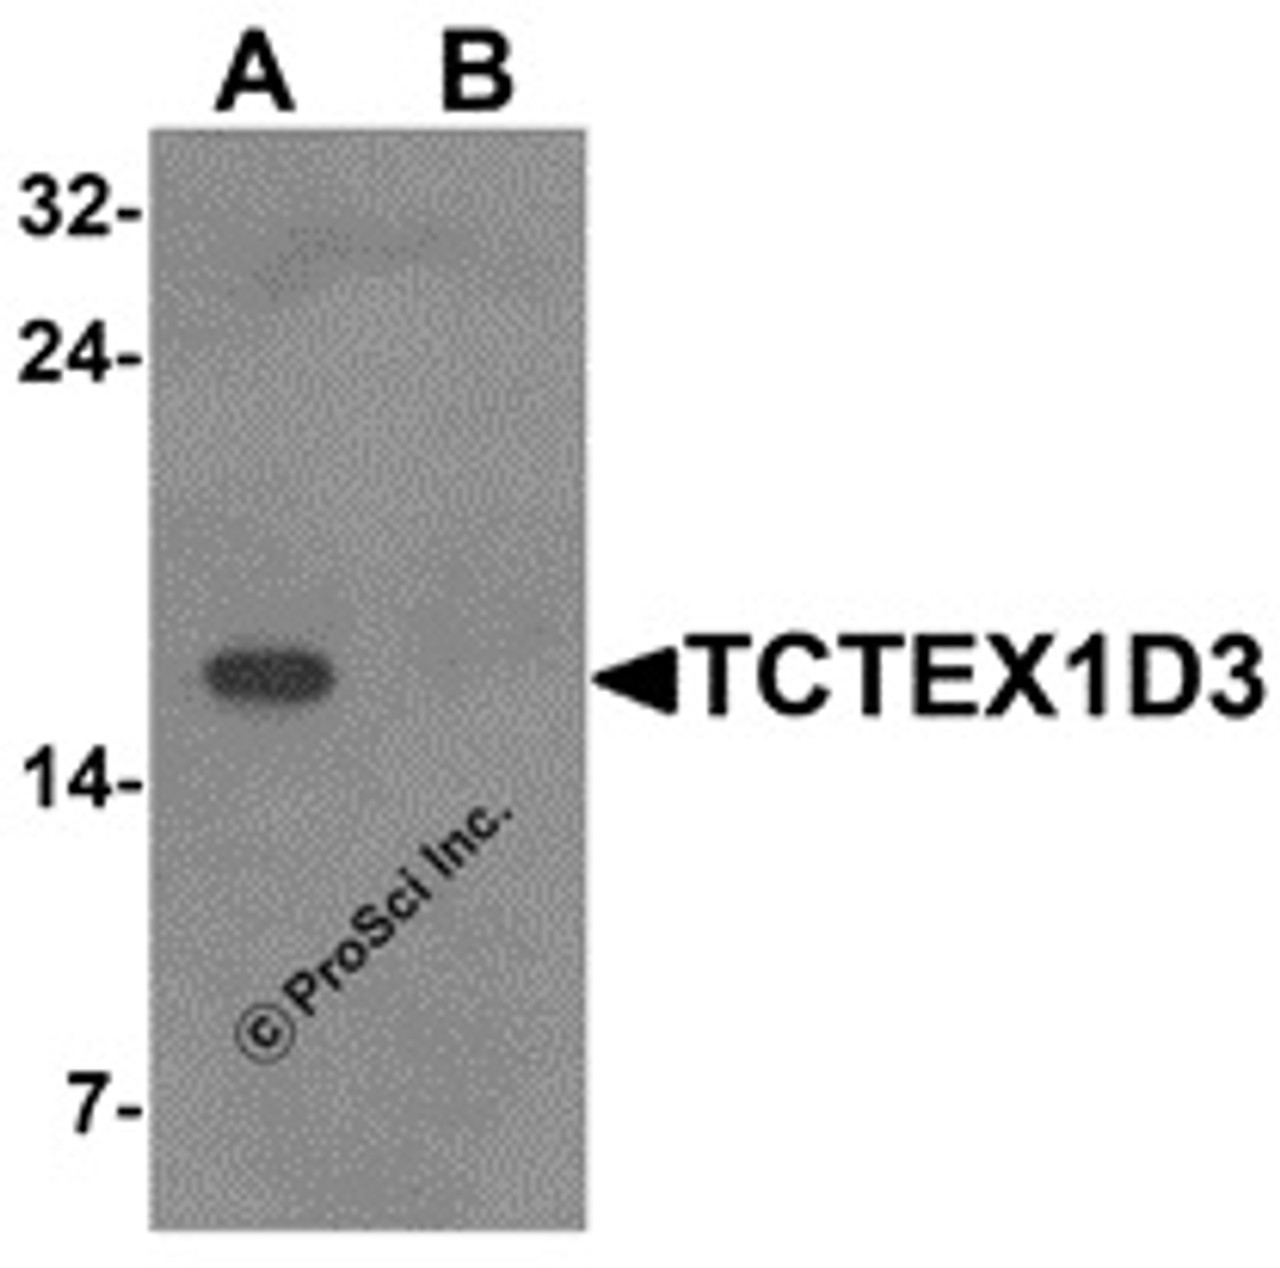 Western blot analysis of TCTEX1D3 in EL4 cell lysate with TCTEX1D3 antibody at 1 &#956;g/mL in (A) the absence and (B) the presence of blocking peptide.